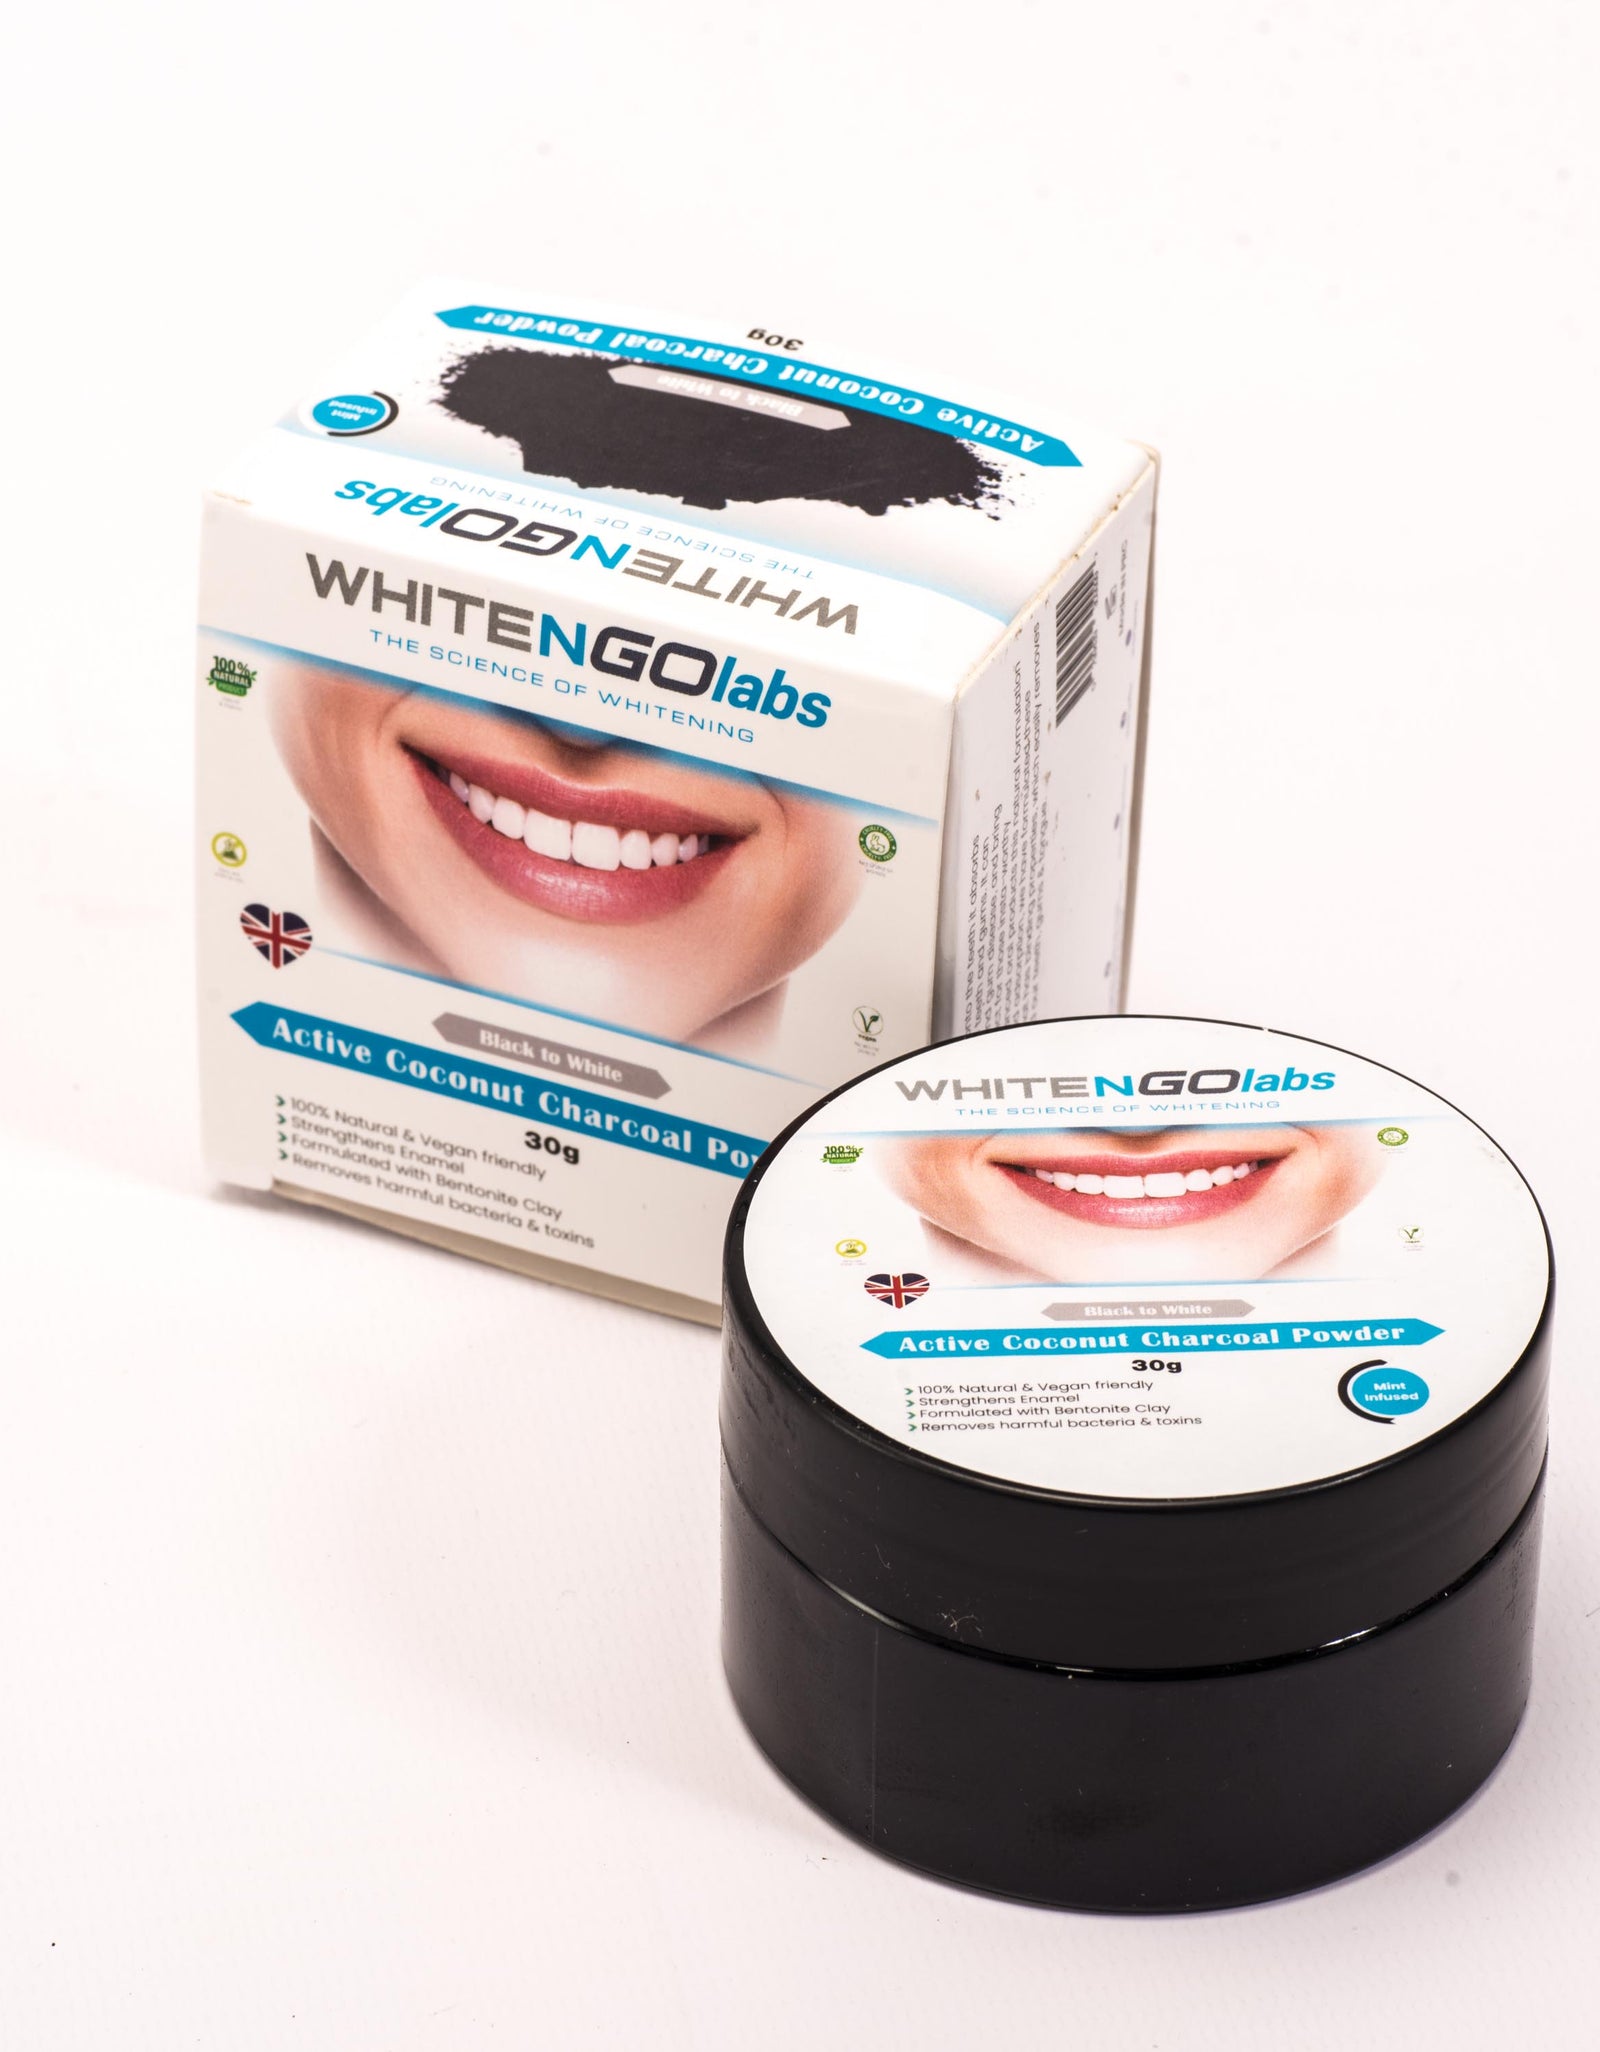 Pack of 5 Charcoal Teeth Whitening Powder